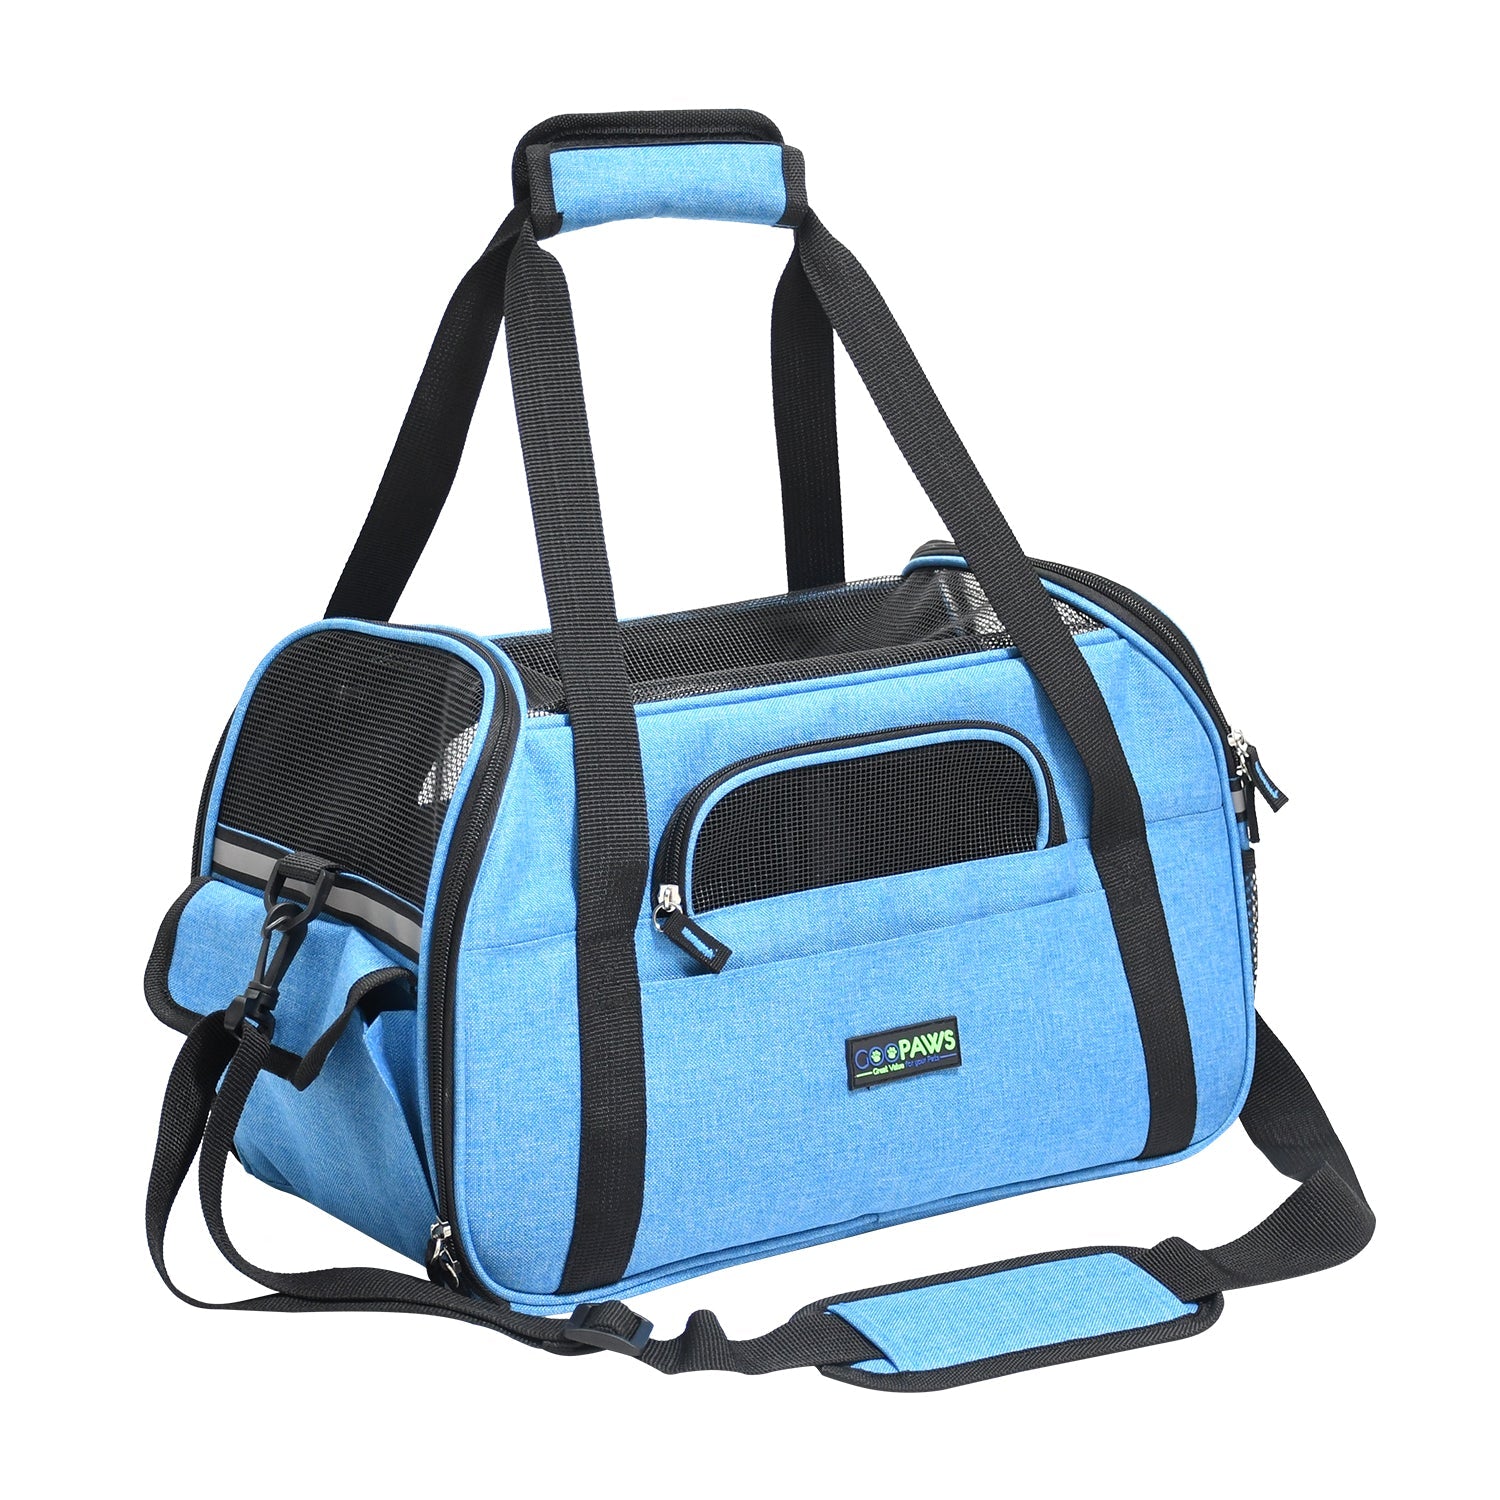 GOOPAWS Soft Sided Small Pet Carrier Ideal for Travel, Turquoise, 17"